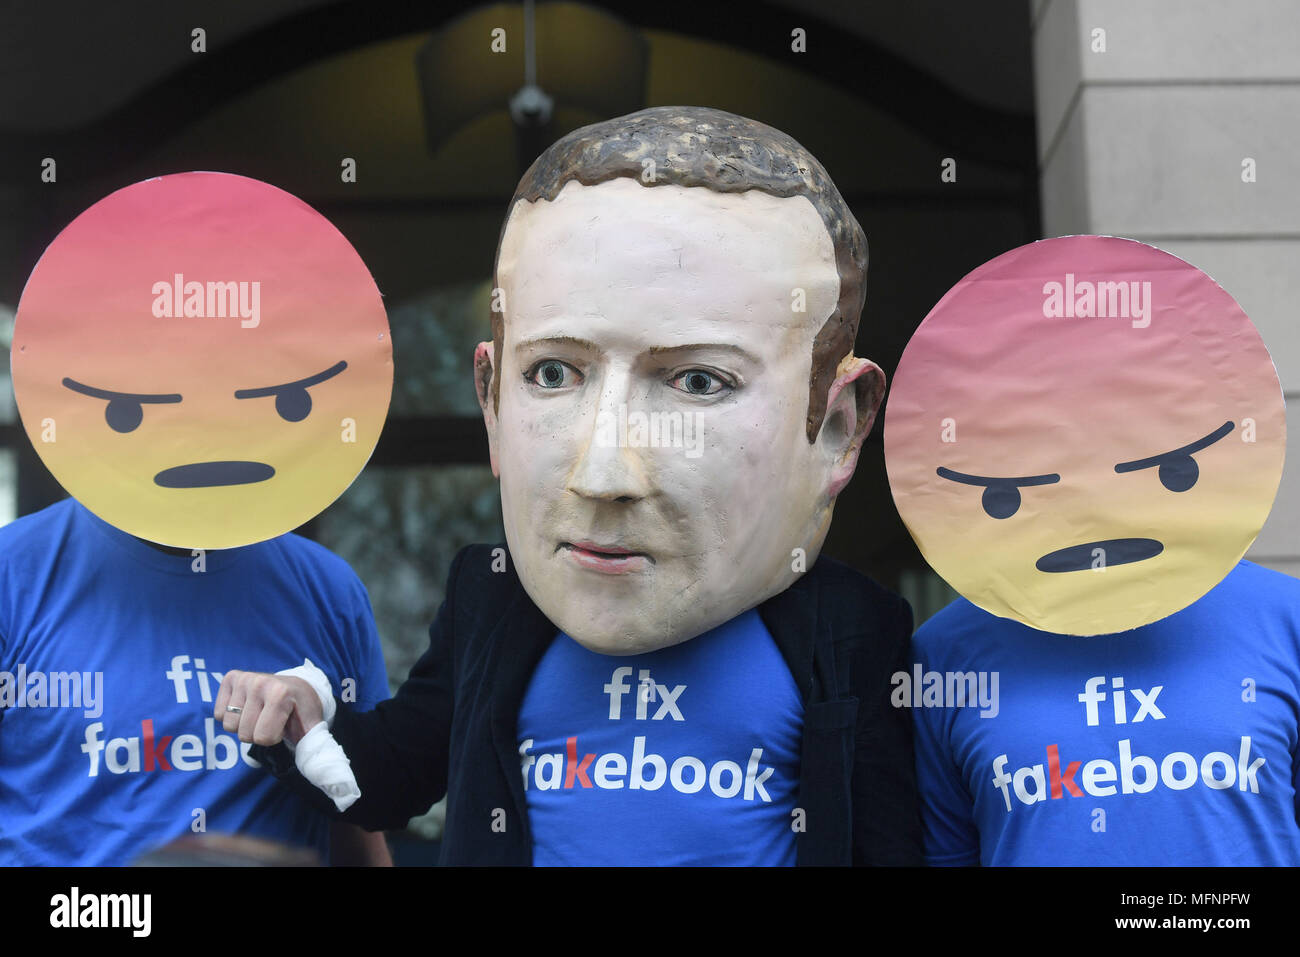 A Mark Zuckerberg figure with people in angry emoji masks outside Portcullis House in Westminster, London ahead of Mike Schroepfer, Chief Technology Officer at Facebook, appearing before the DCMS inquiry into fake news. Stock Photo